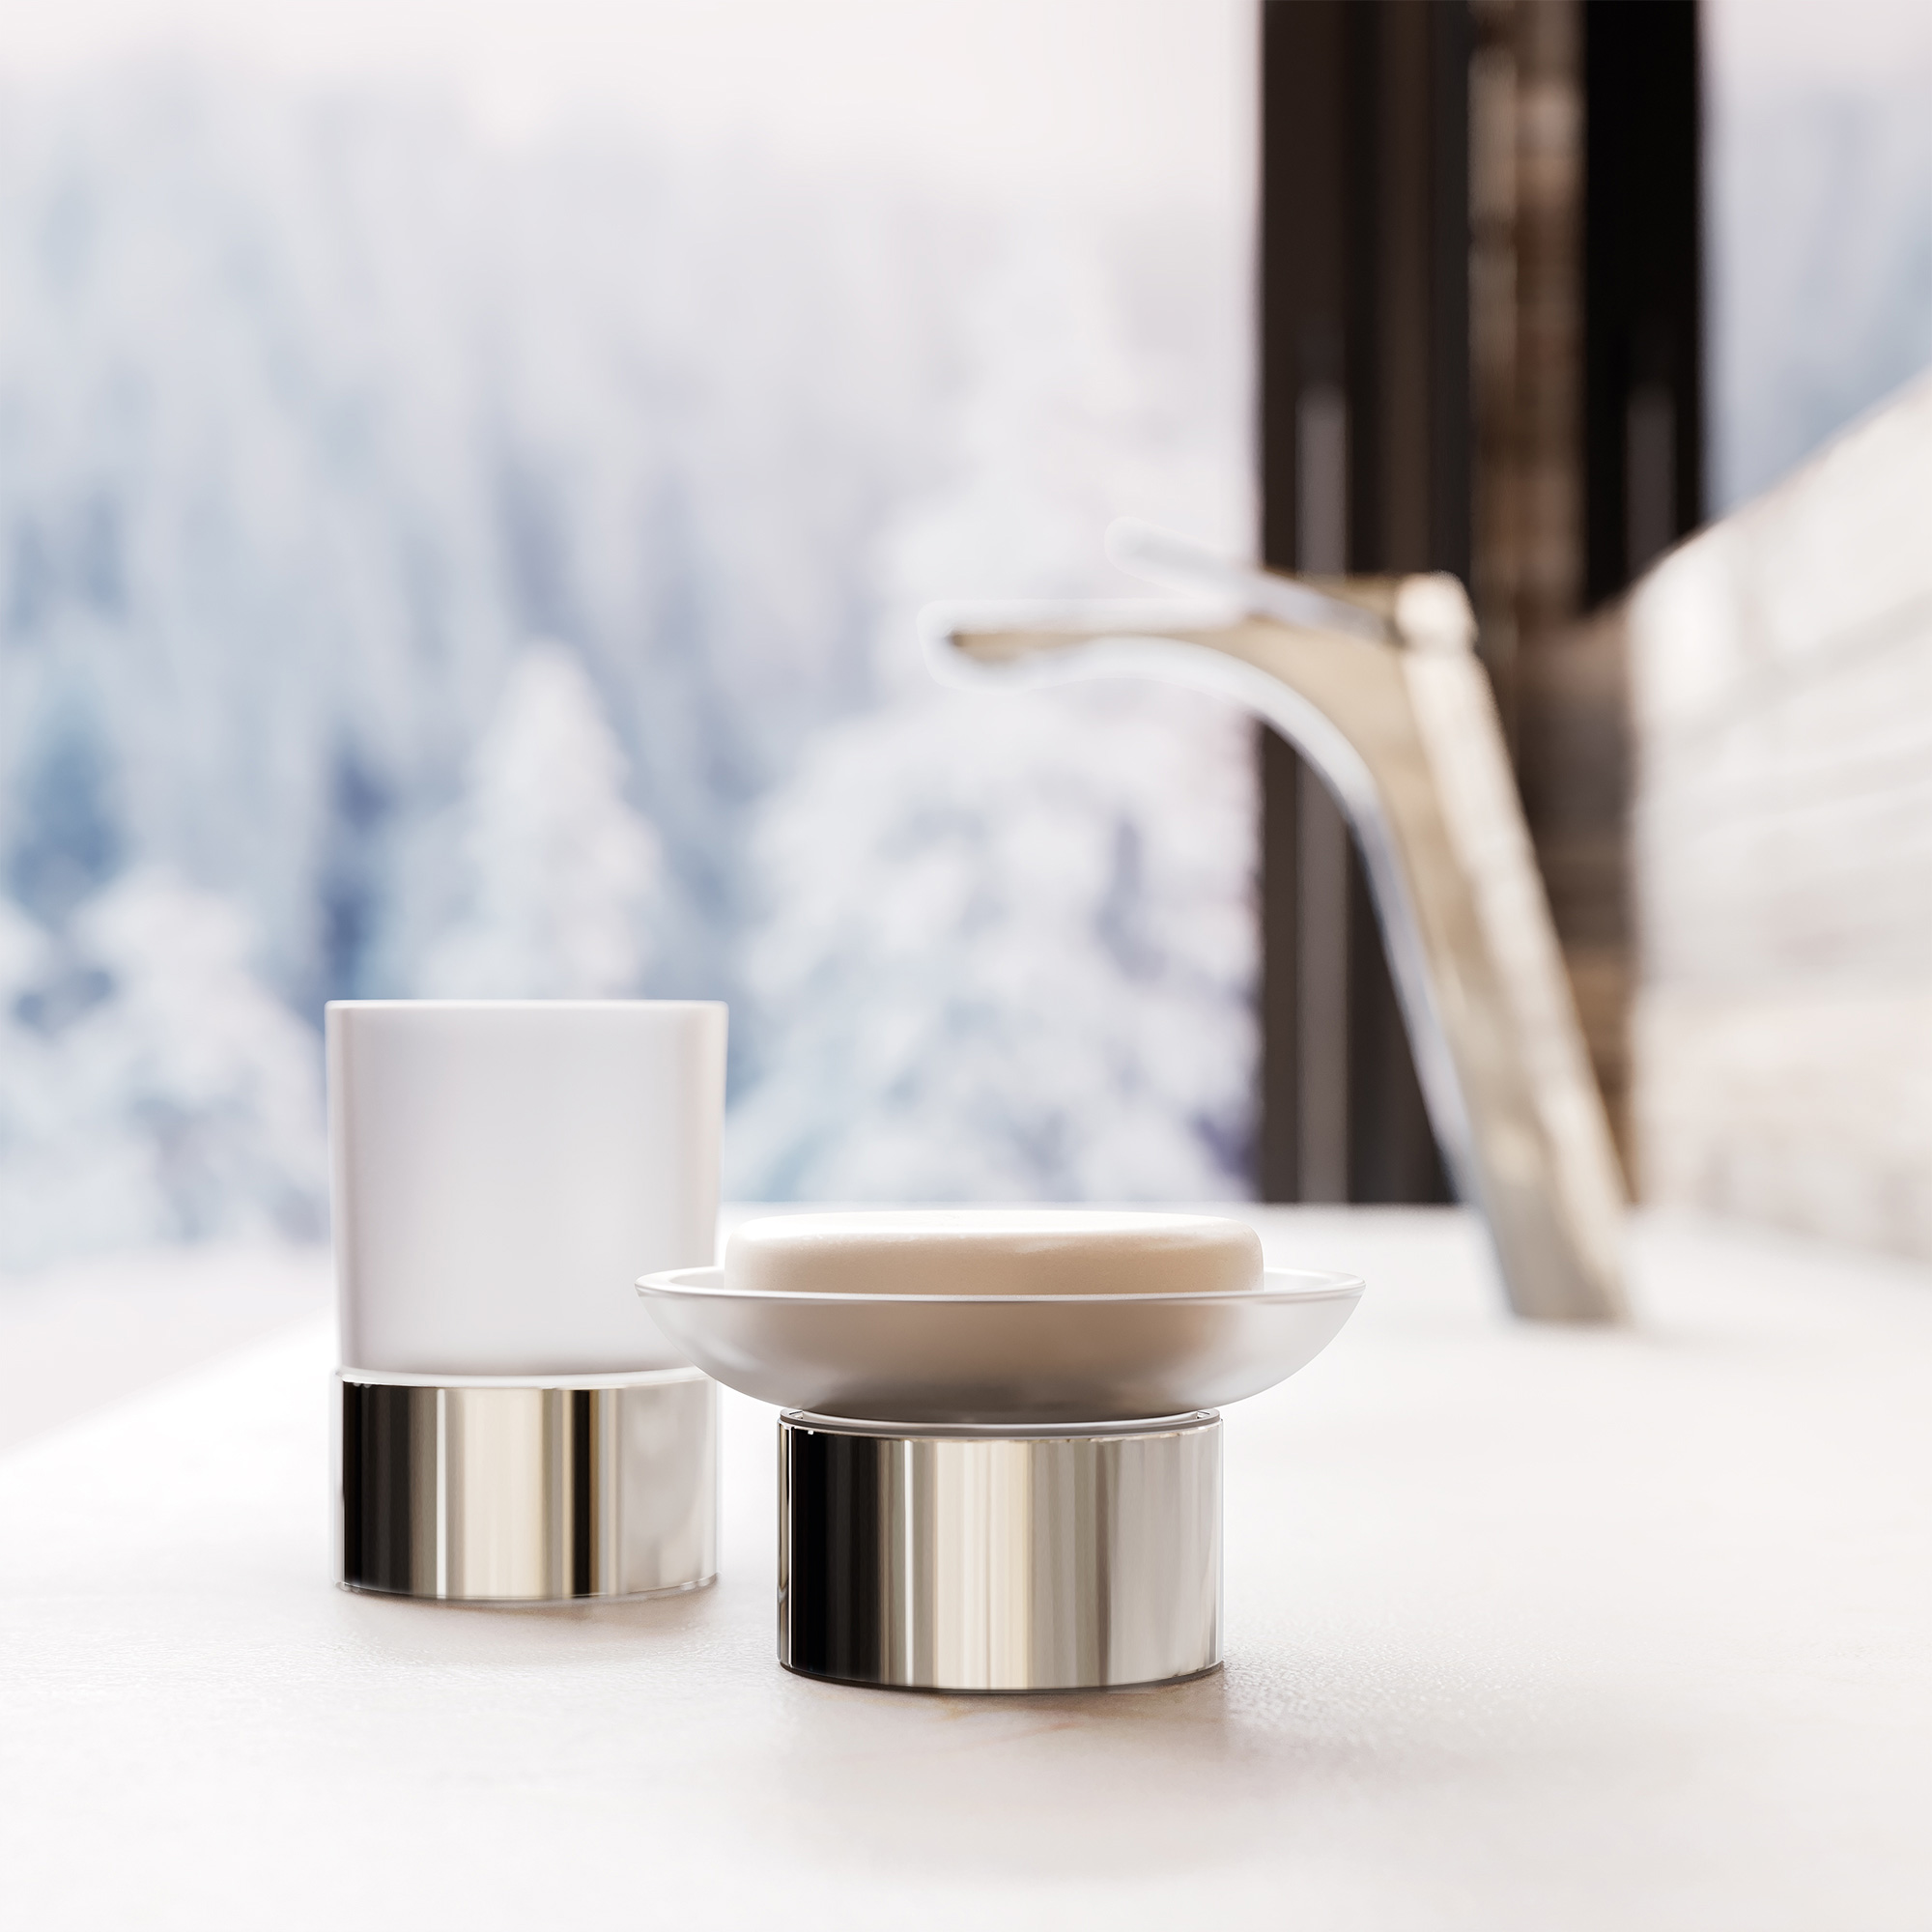 Alpine Chic 2021 – Jörger\'s new collection “Eleven” celebrates its stylish  premiere in the Chalet - Jörger Bathroom Fittings and Accessories